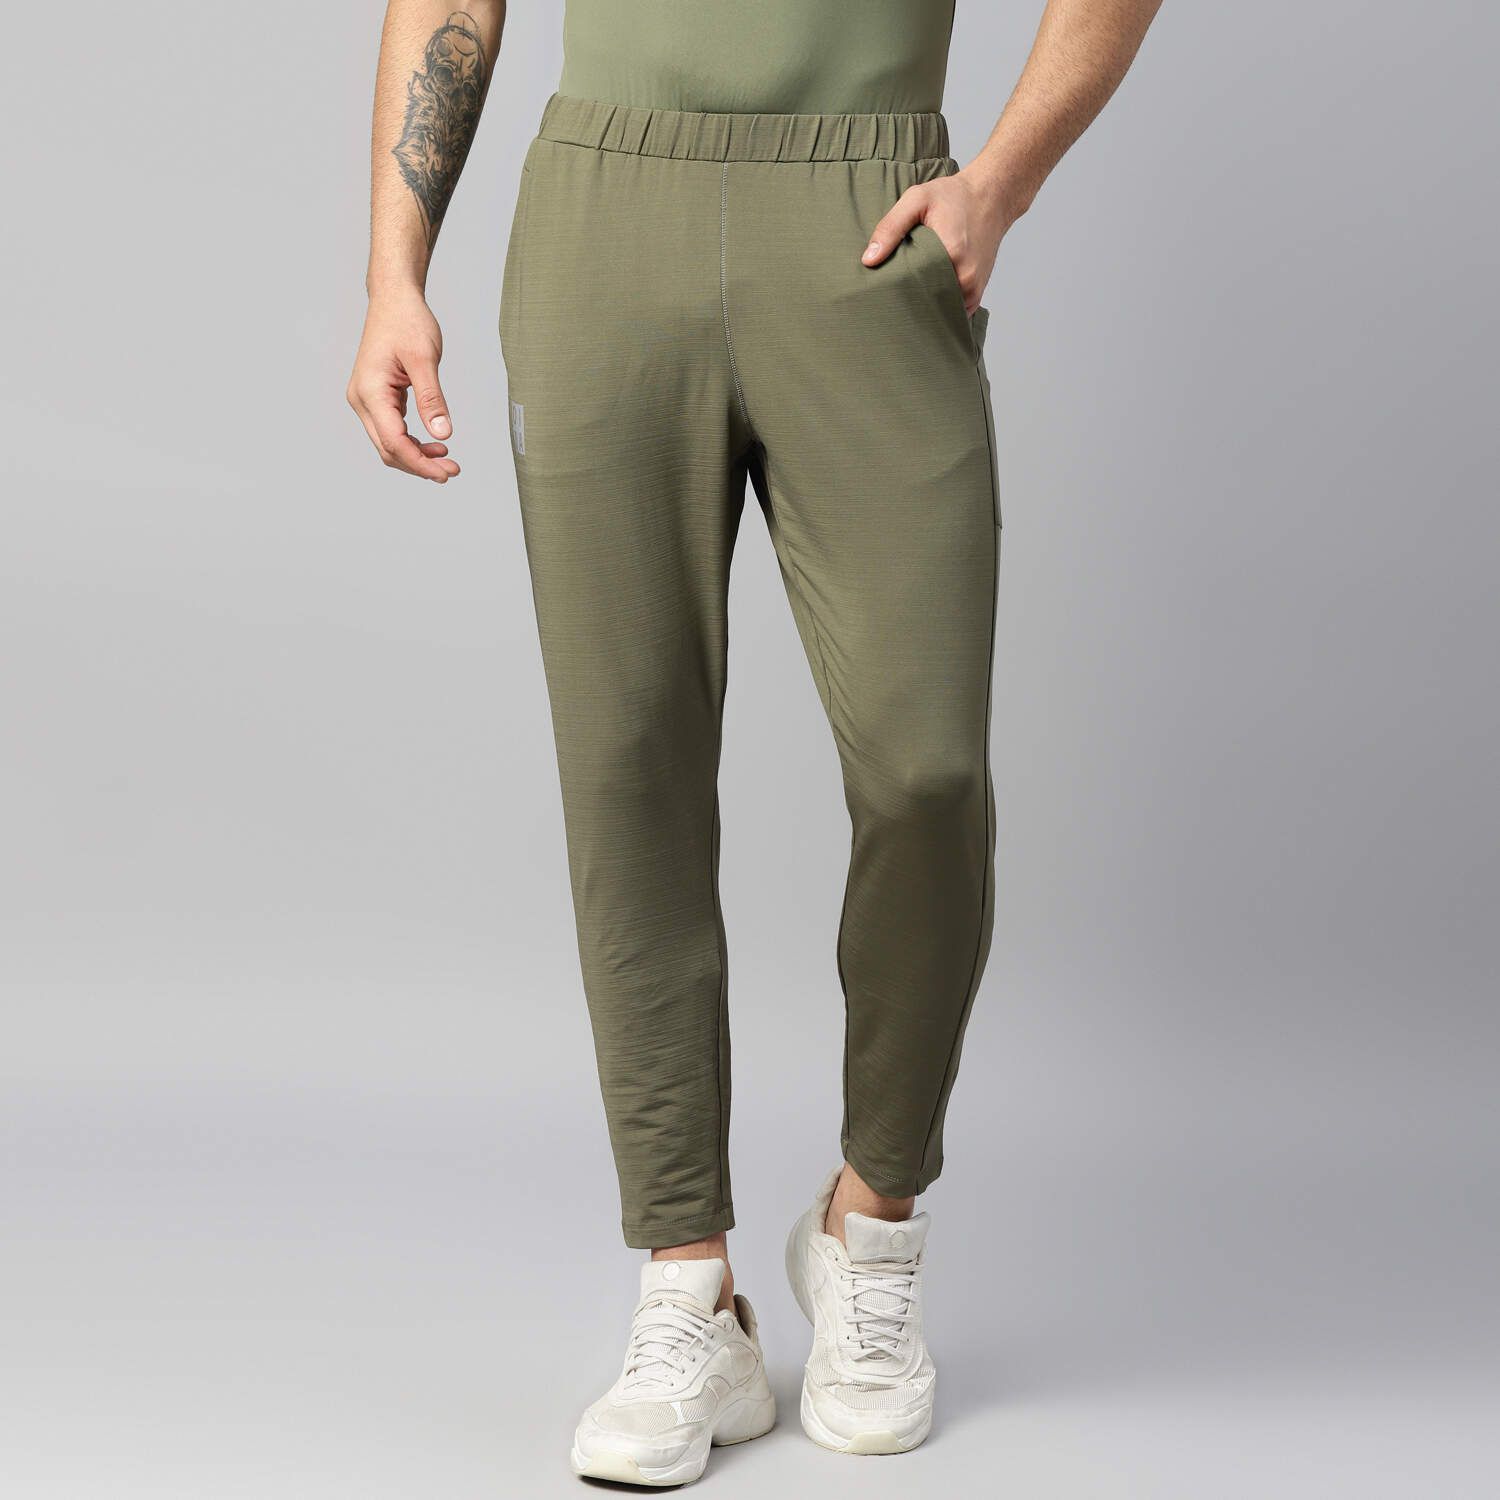     			Dida Sportswear Dark Green Polyester Men's Sports Trackpants ( Pack of 1 )